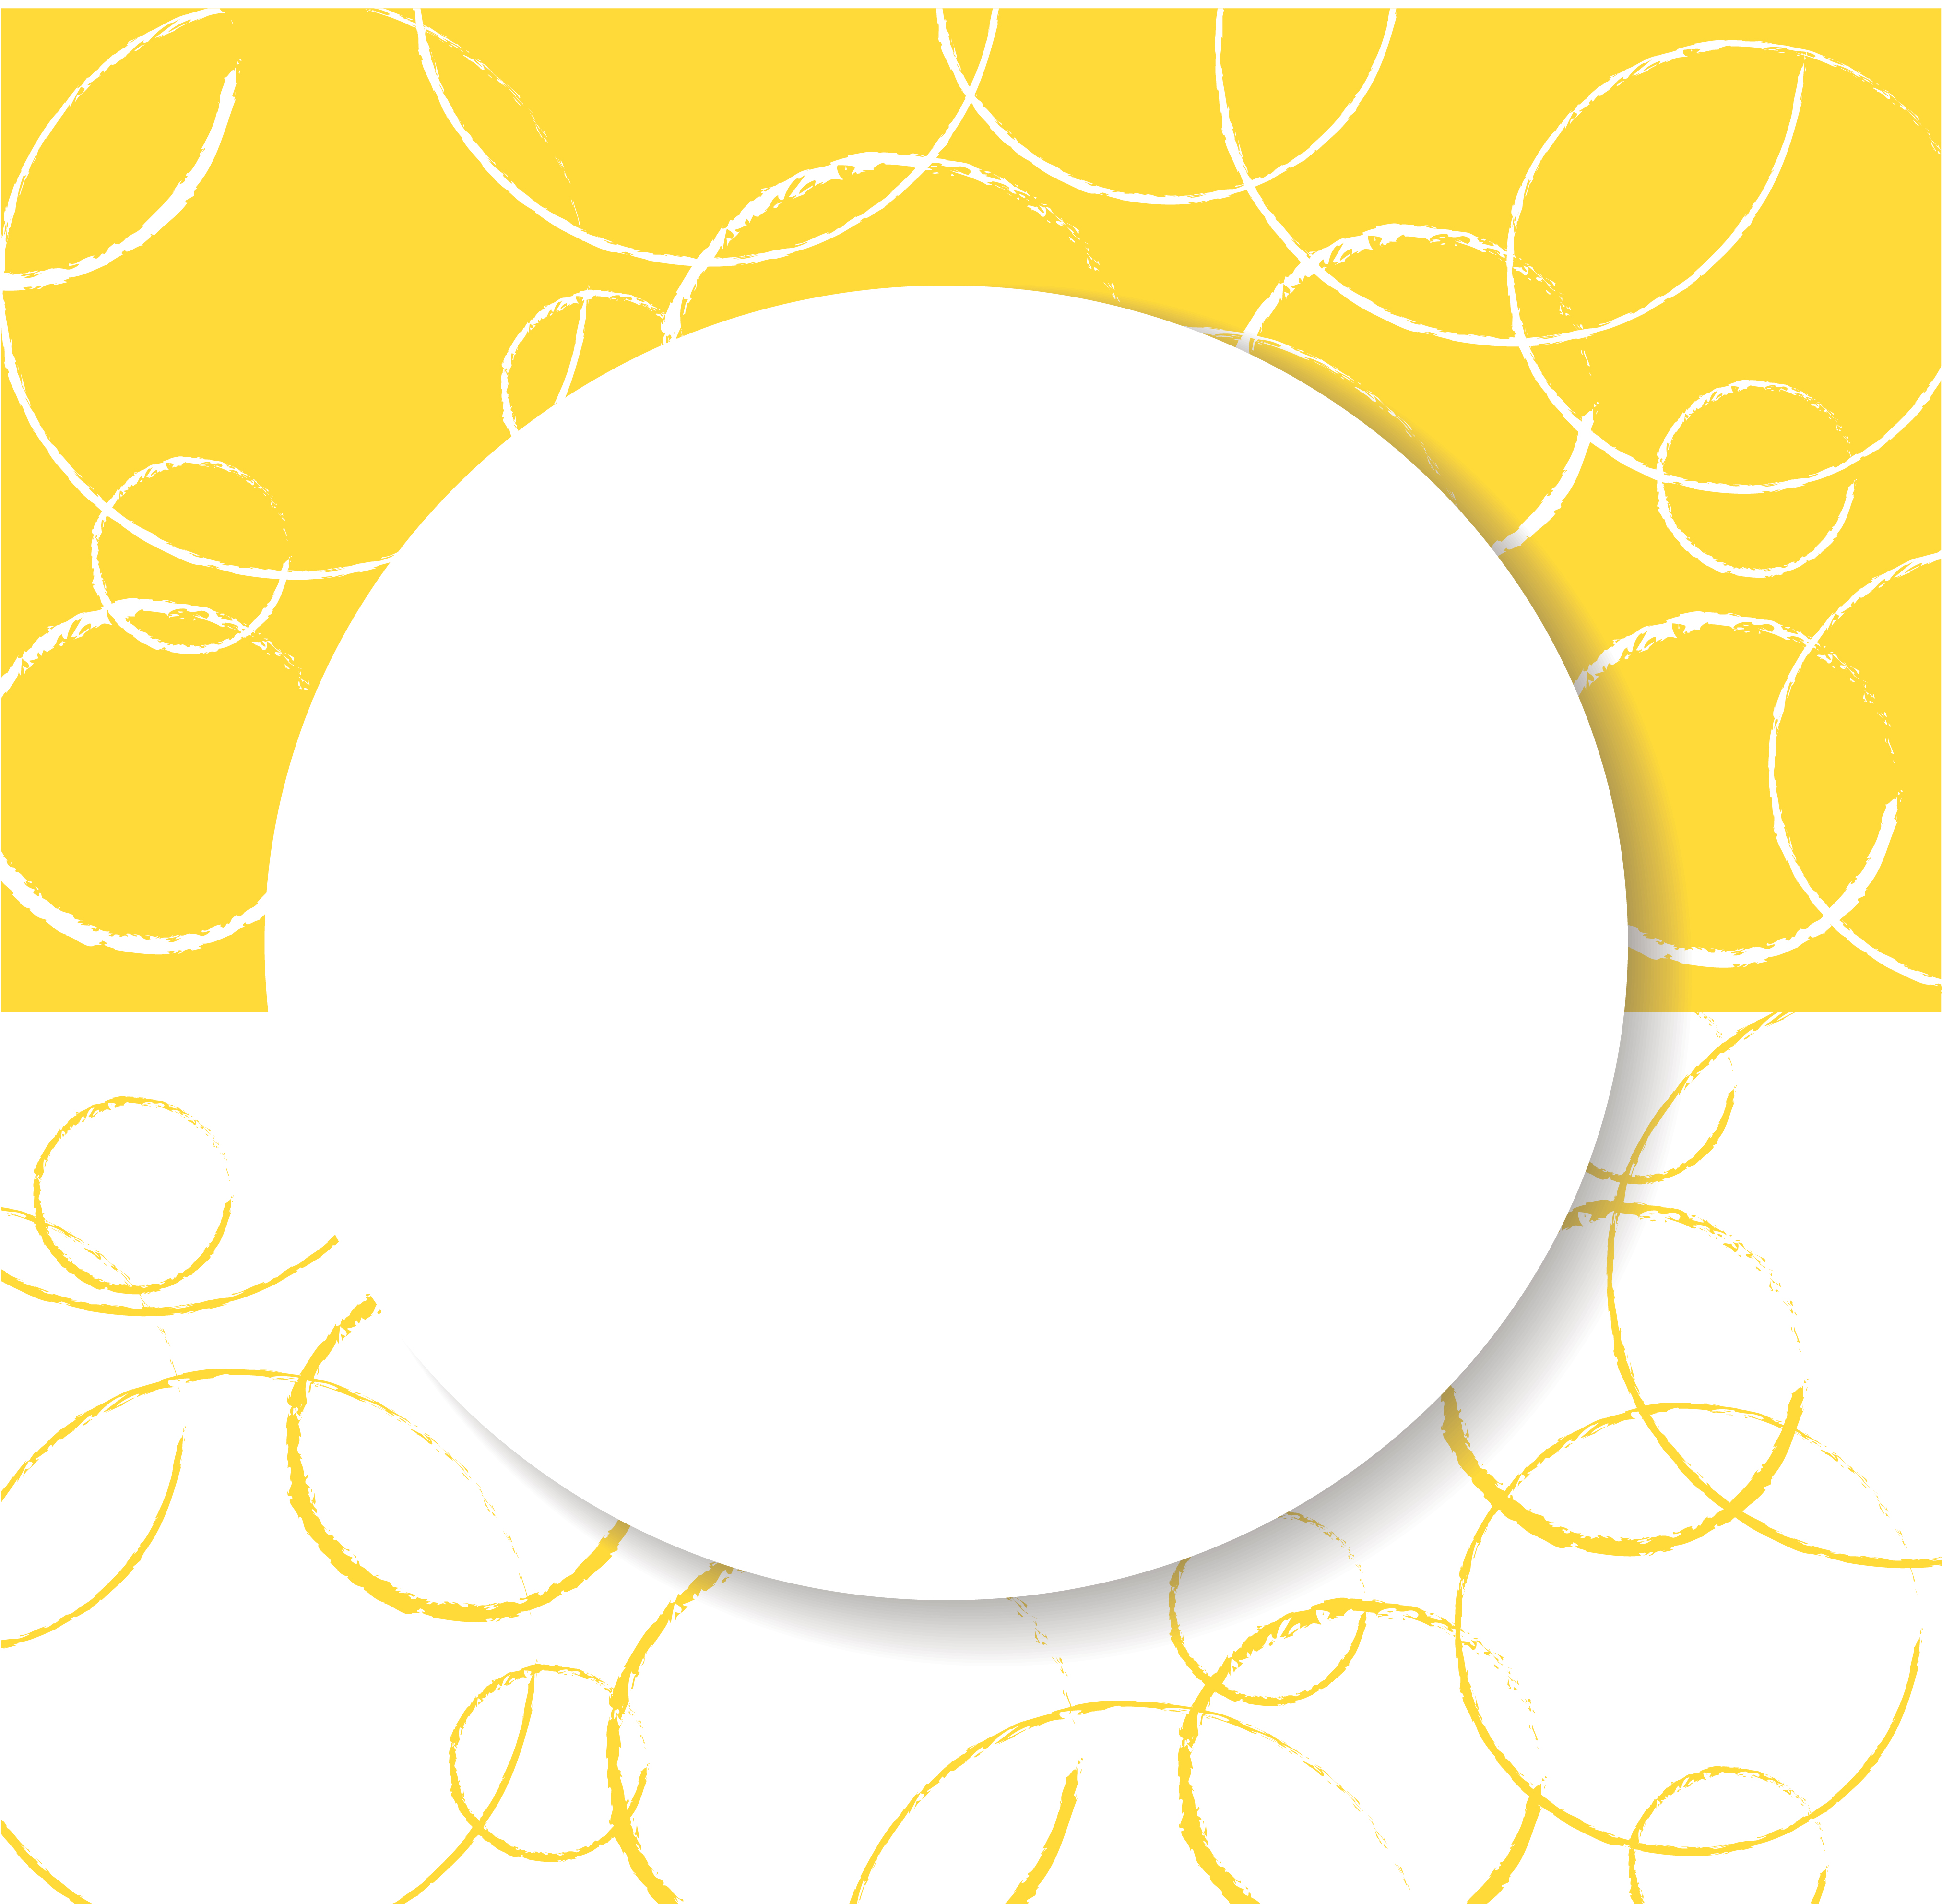 Download abstract yellow circle background vector - Download Free ...